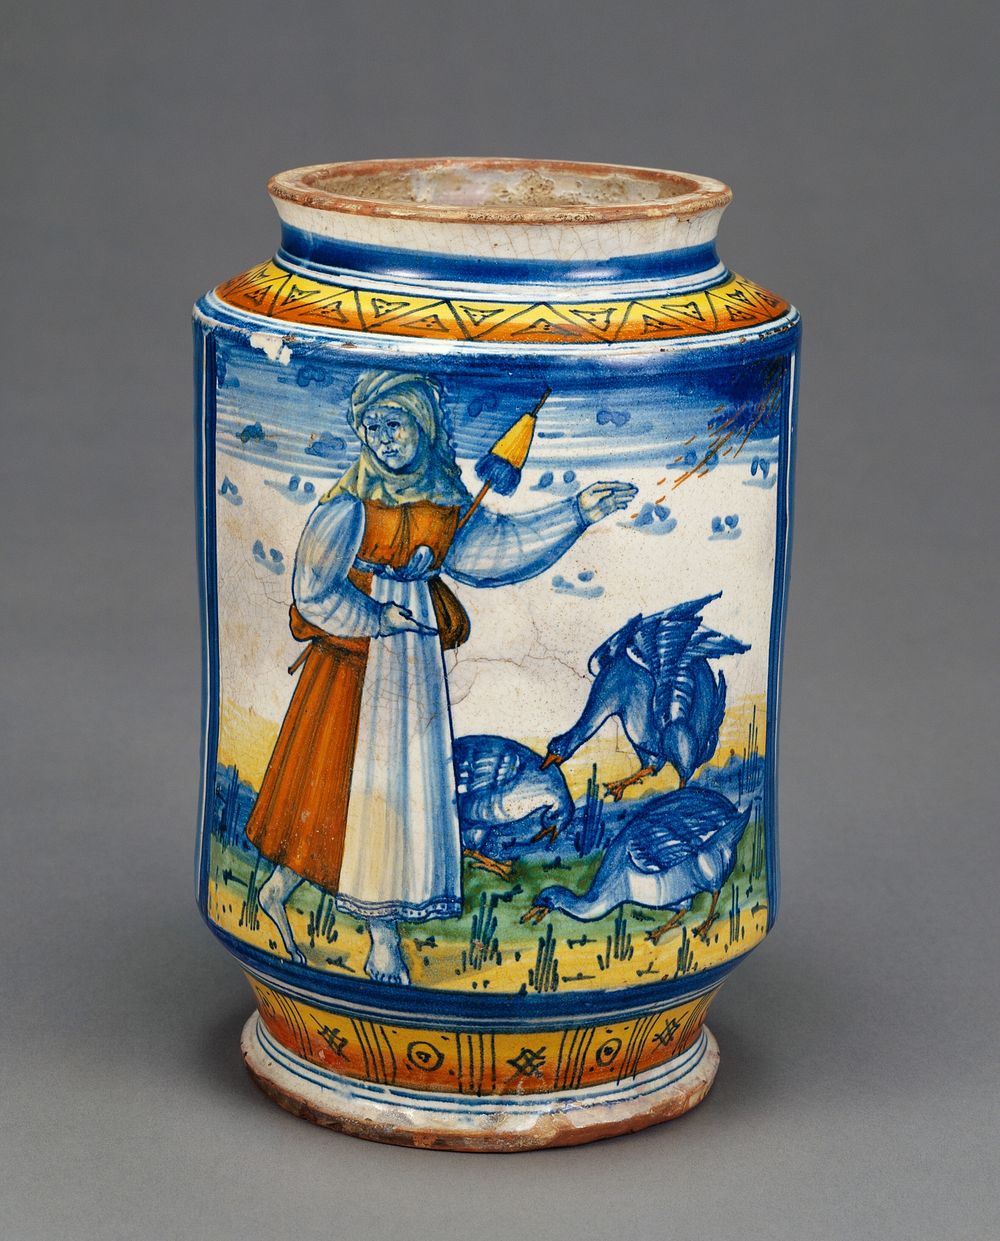 Jar with a Woman and Geese